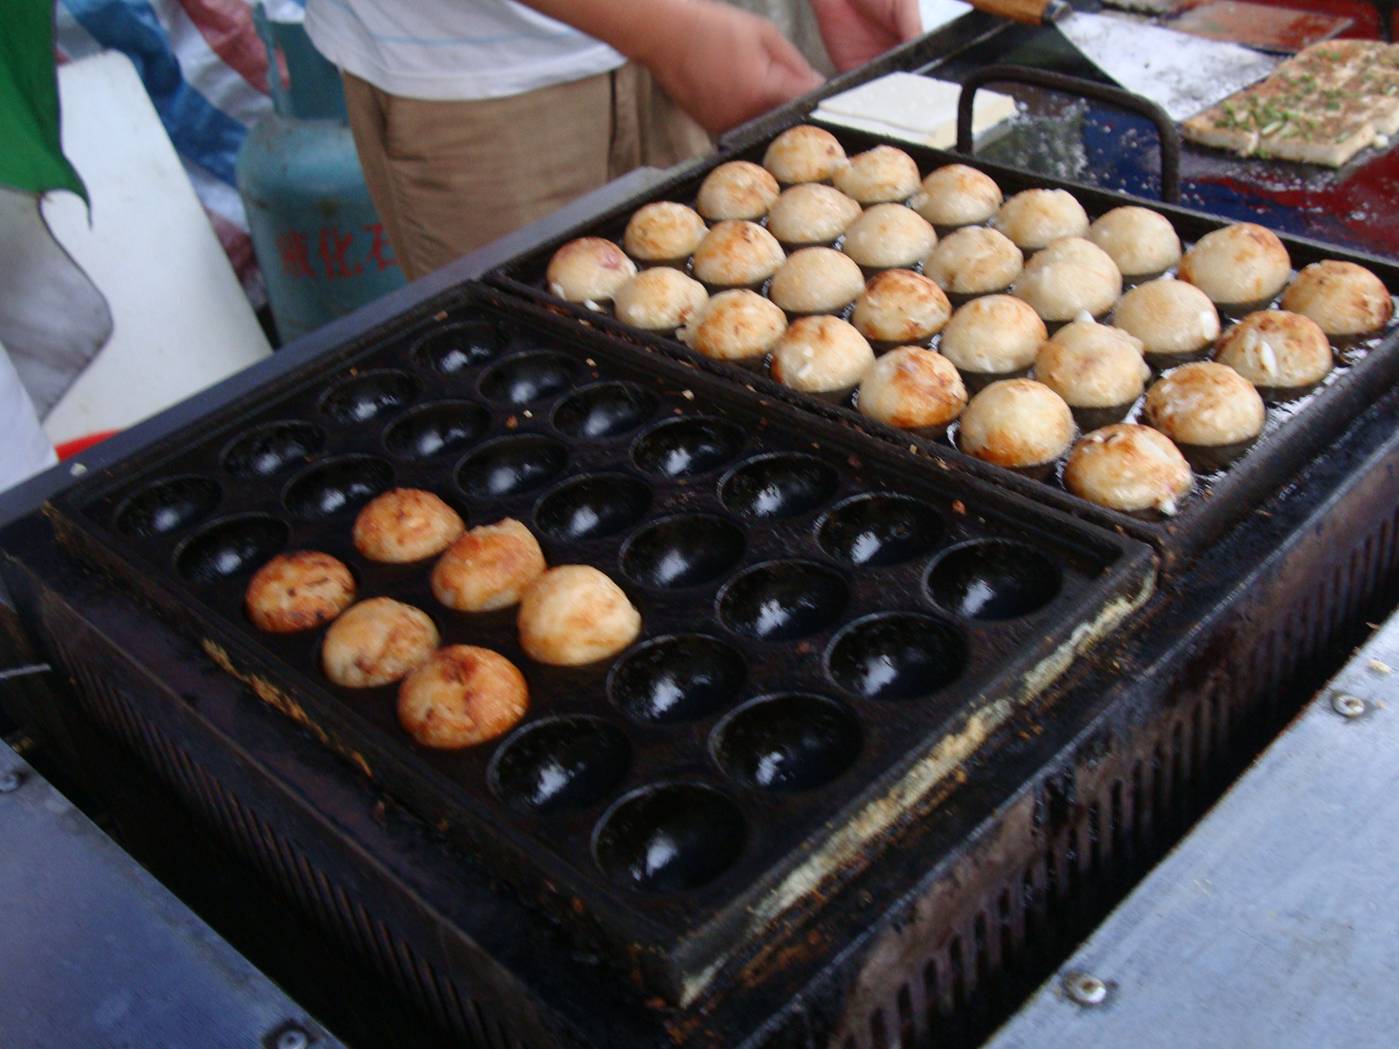 Picture:  We're always fascinated by the way they make these into perfectly round balls without an actual mold.  Wuxi, China